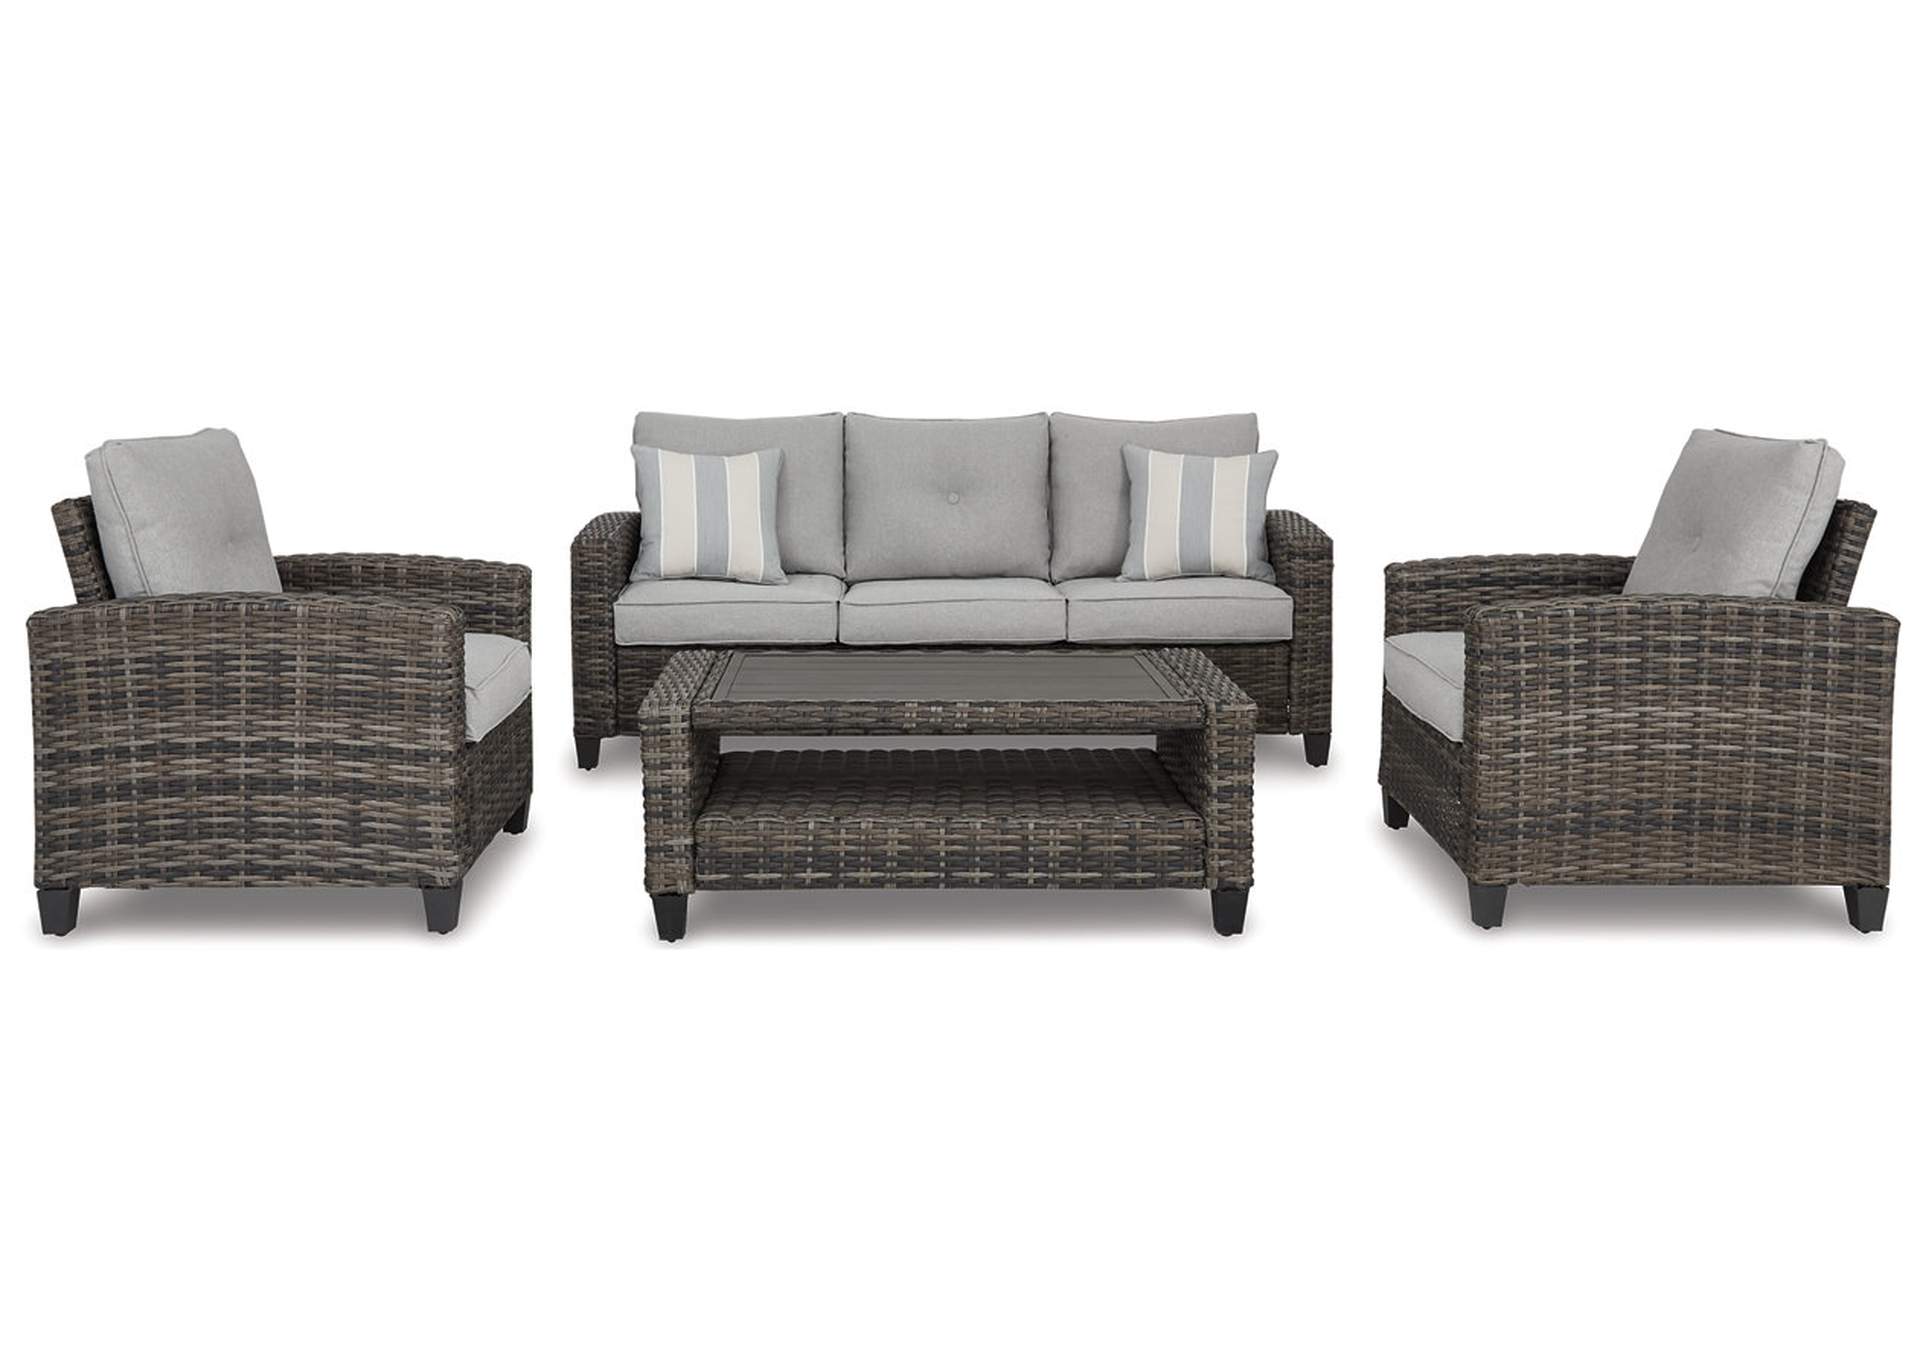 Cloverbrooke 4 Piece Outdoor Conversation Set Ashley Furniture Homestore Independently Owned And Operated By Hamad M Al Rugaib Sons Trading Co